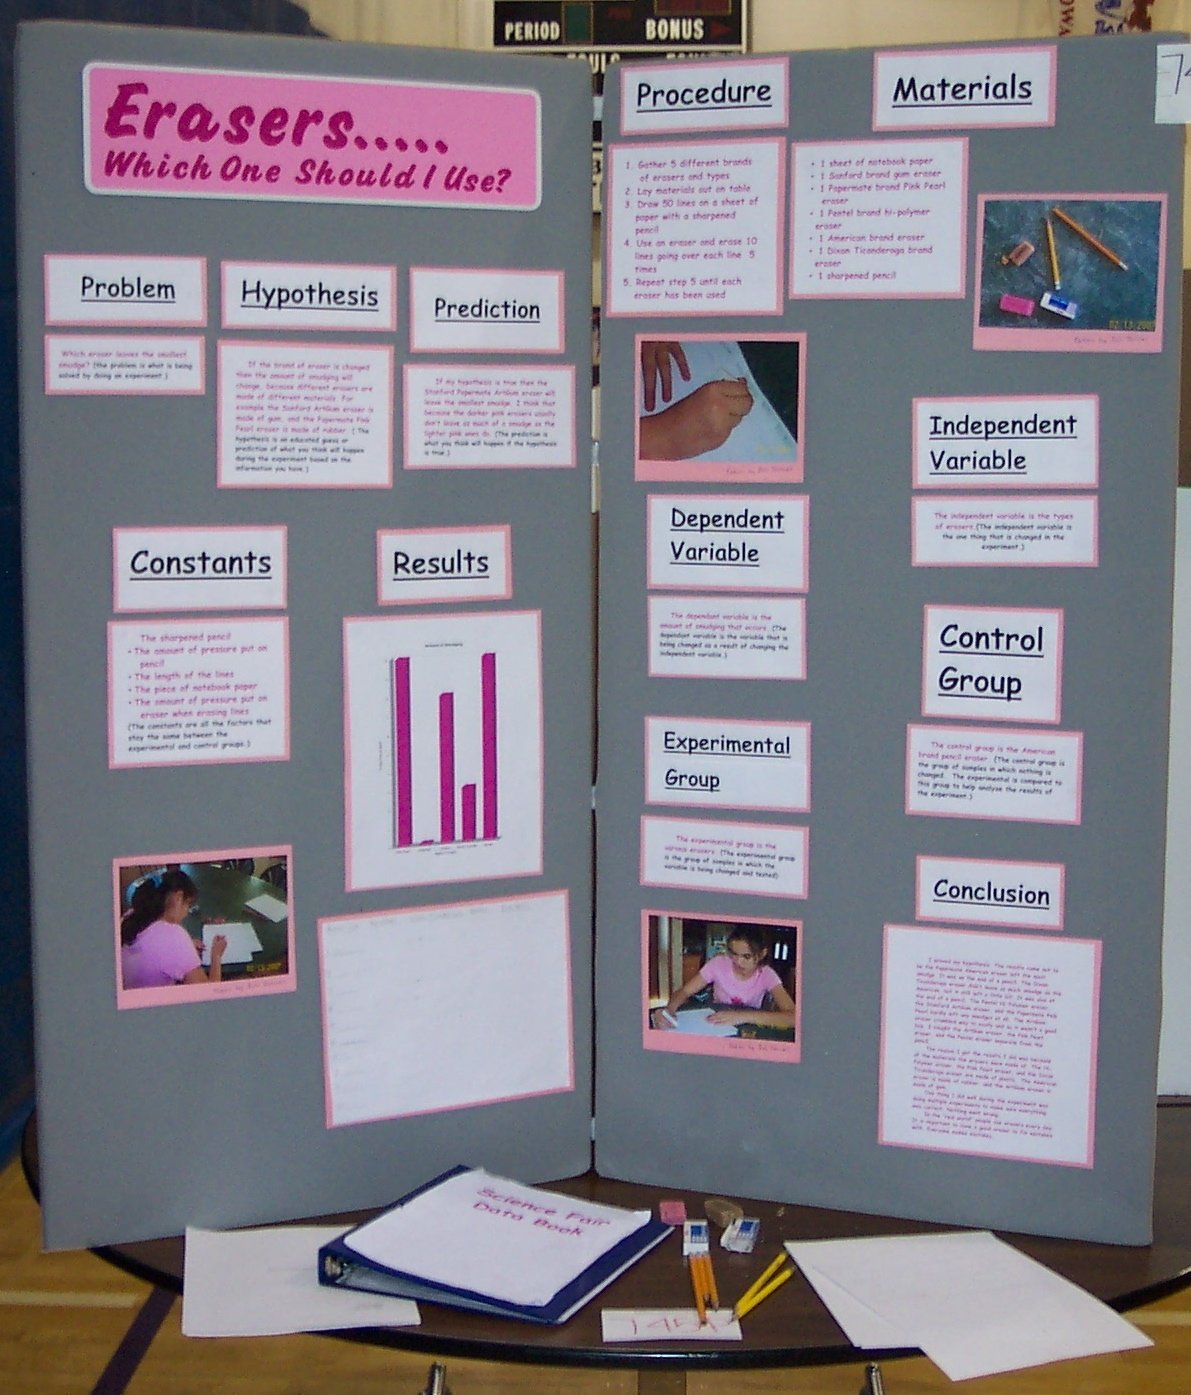 10 Attractive Science Fair Project Ideas For 8Th Grade List 8th grade science project ideas list homeshealth 34 2022